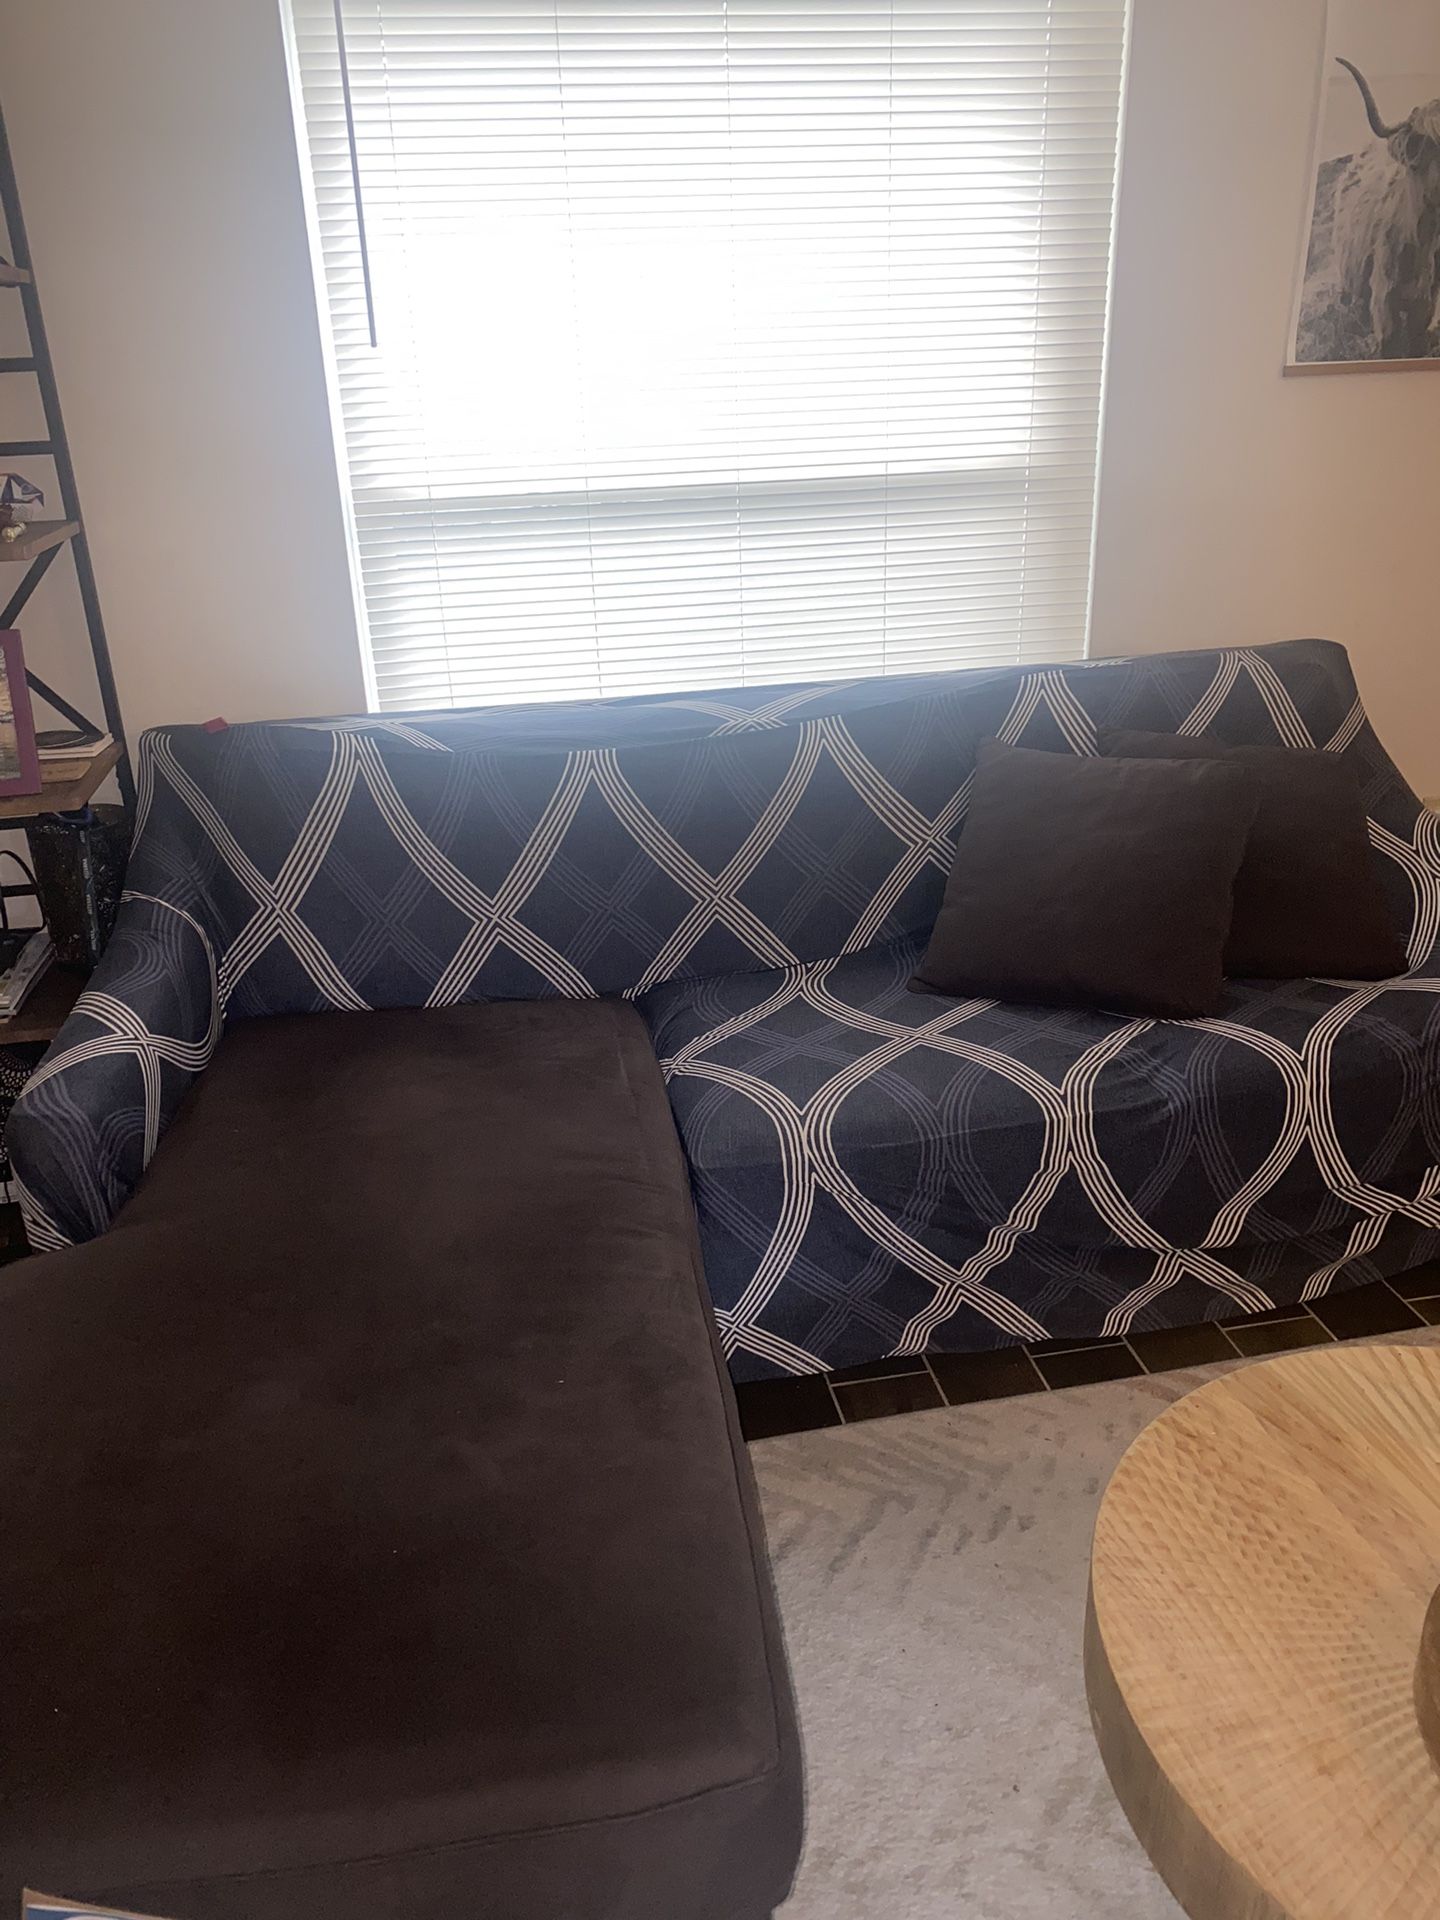 Couch - Make an offer! Pickup only!